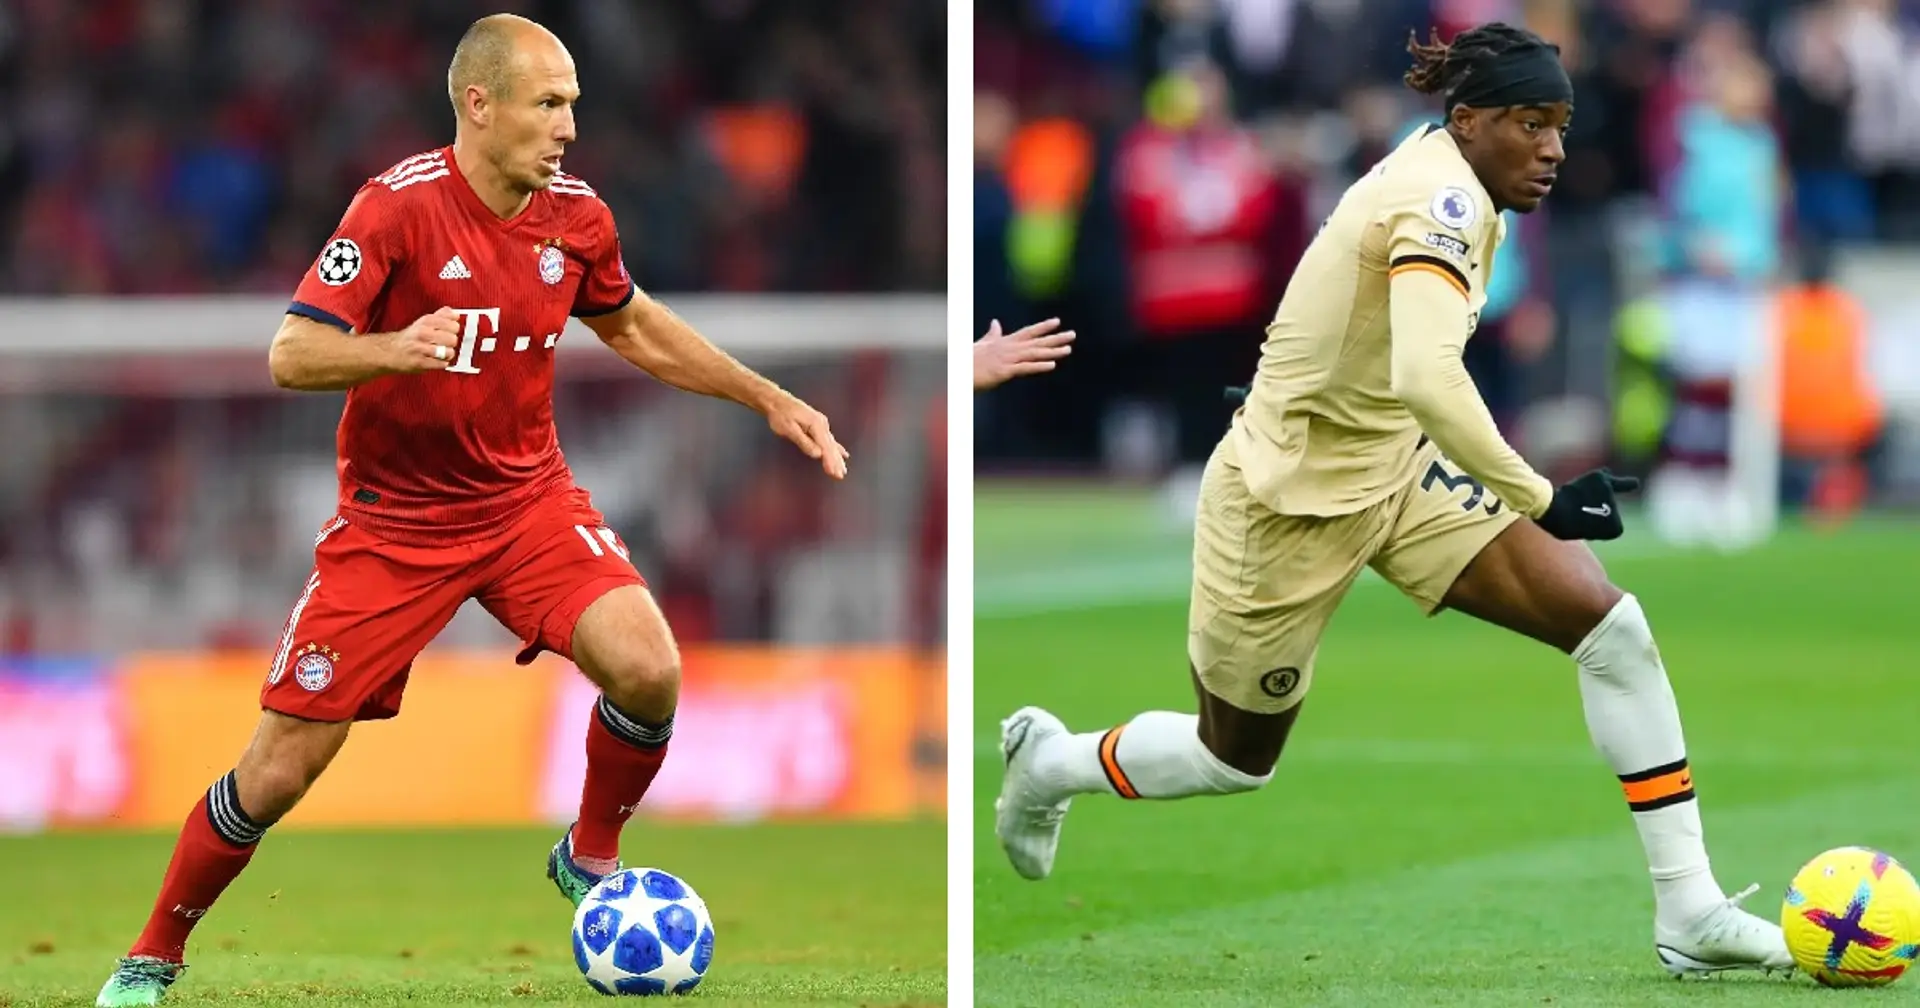 'Sometimes you have to tell him to calm down': Madueke's personal coach makes Robben comparison